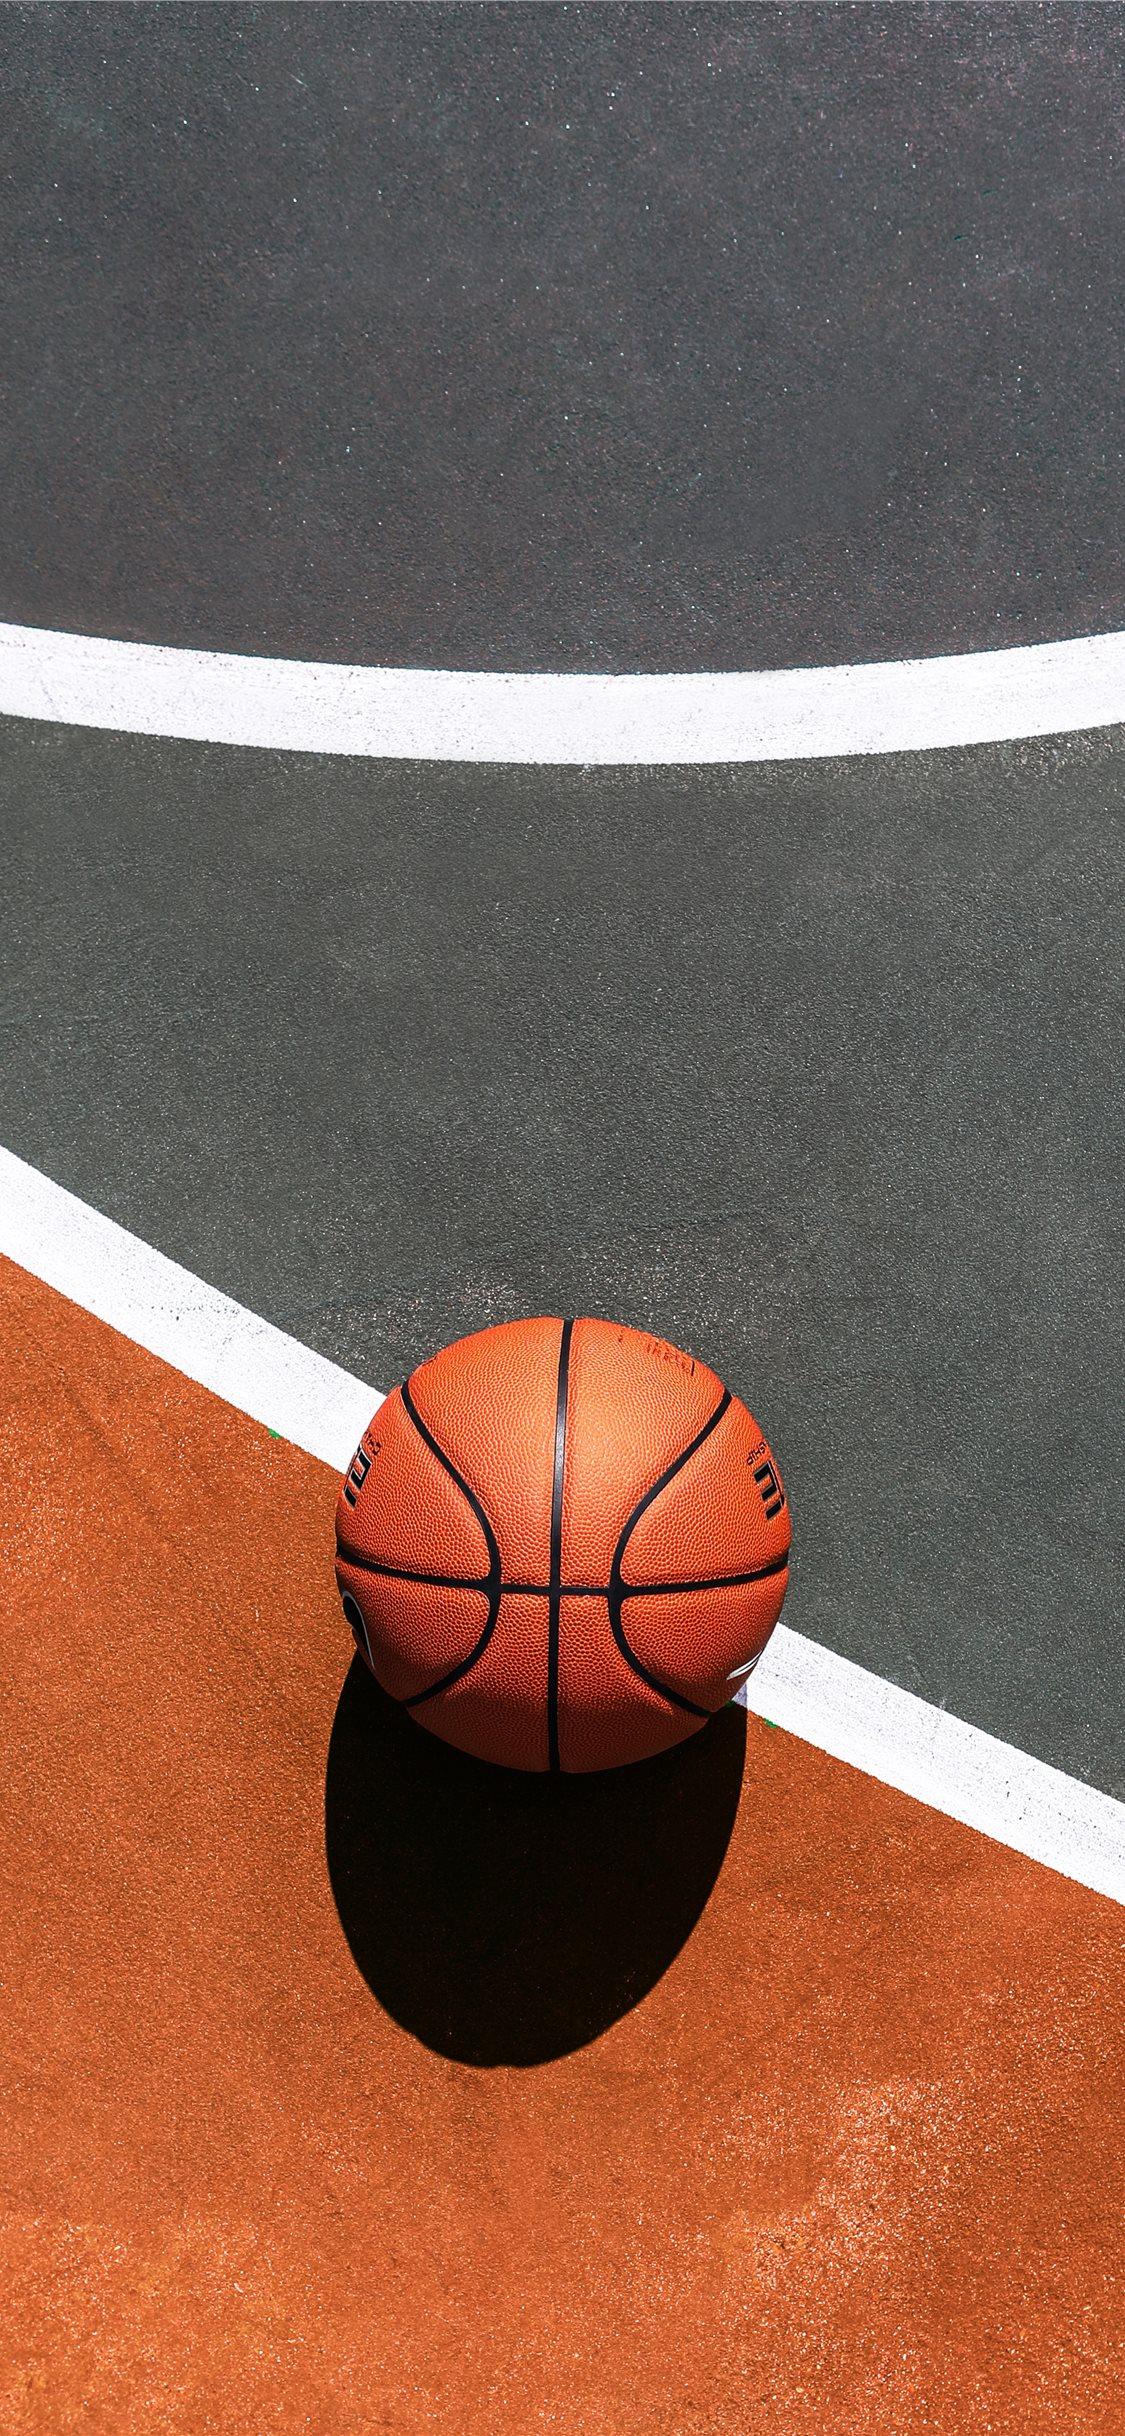 basketball wallpapers hd iphone